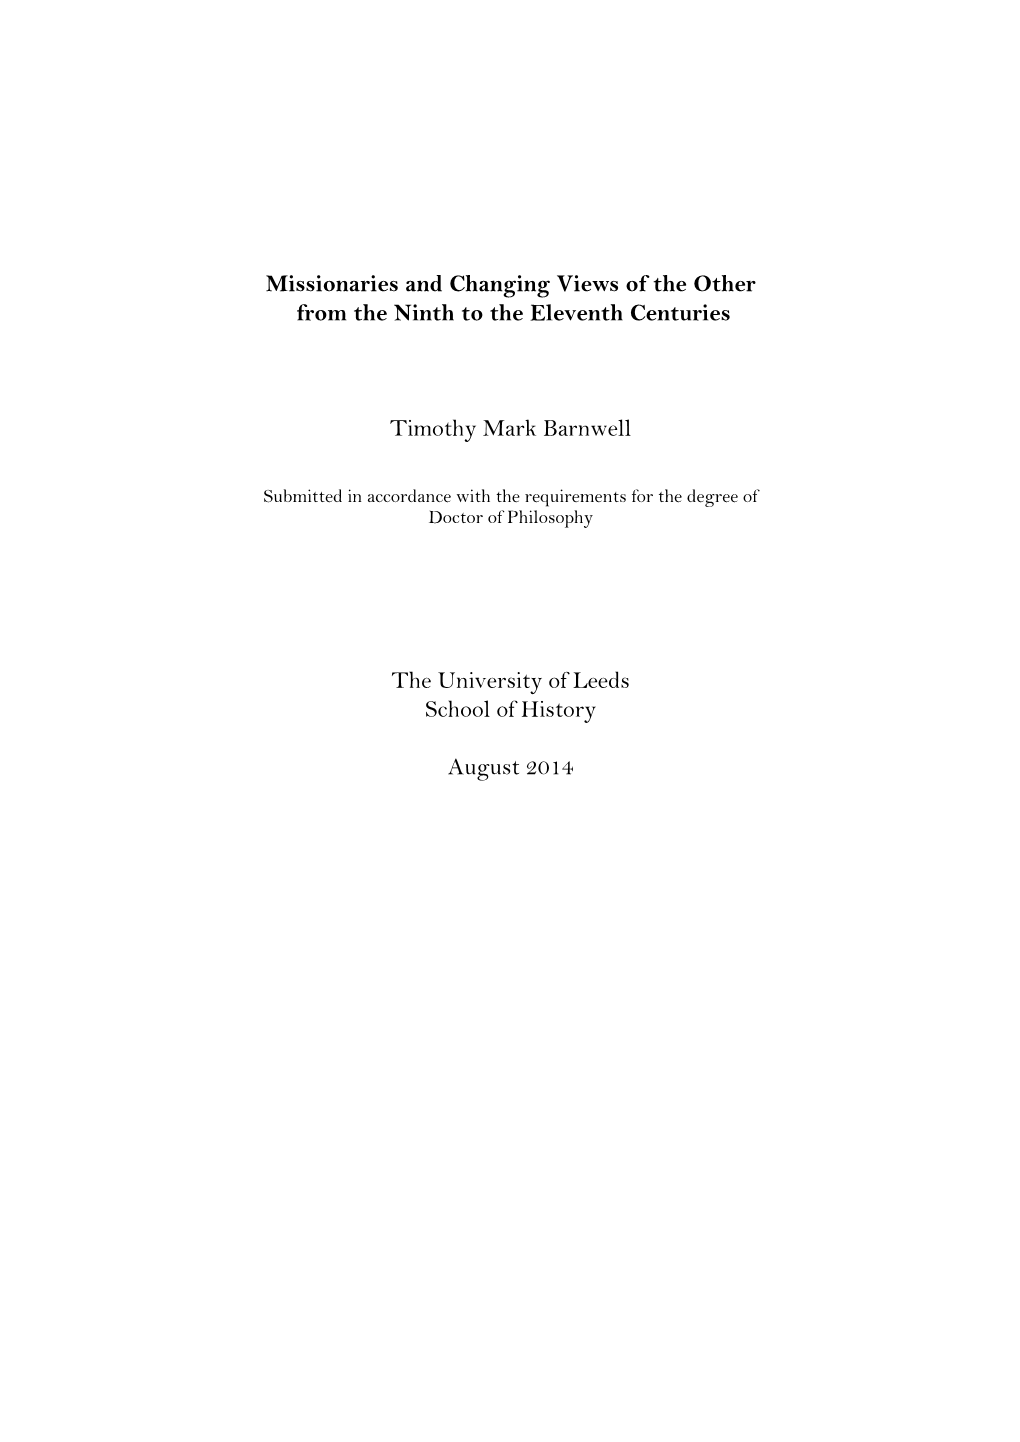 T M Barnwell Phd Thesis. Missionaries and Changing Views of the Other